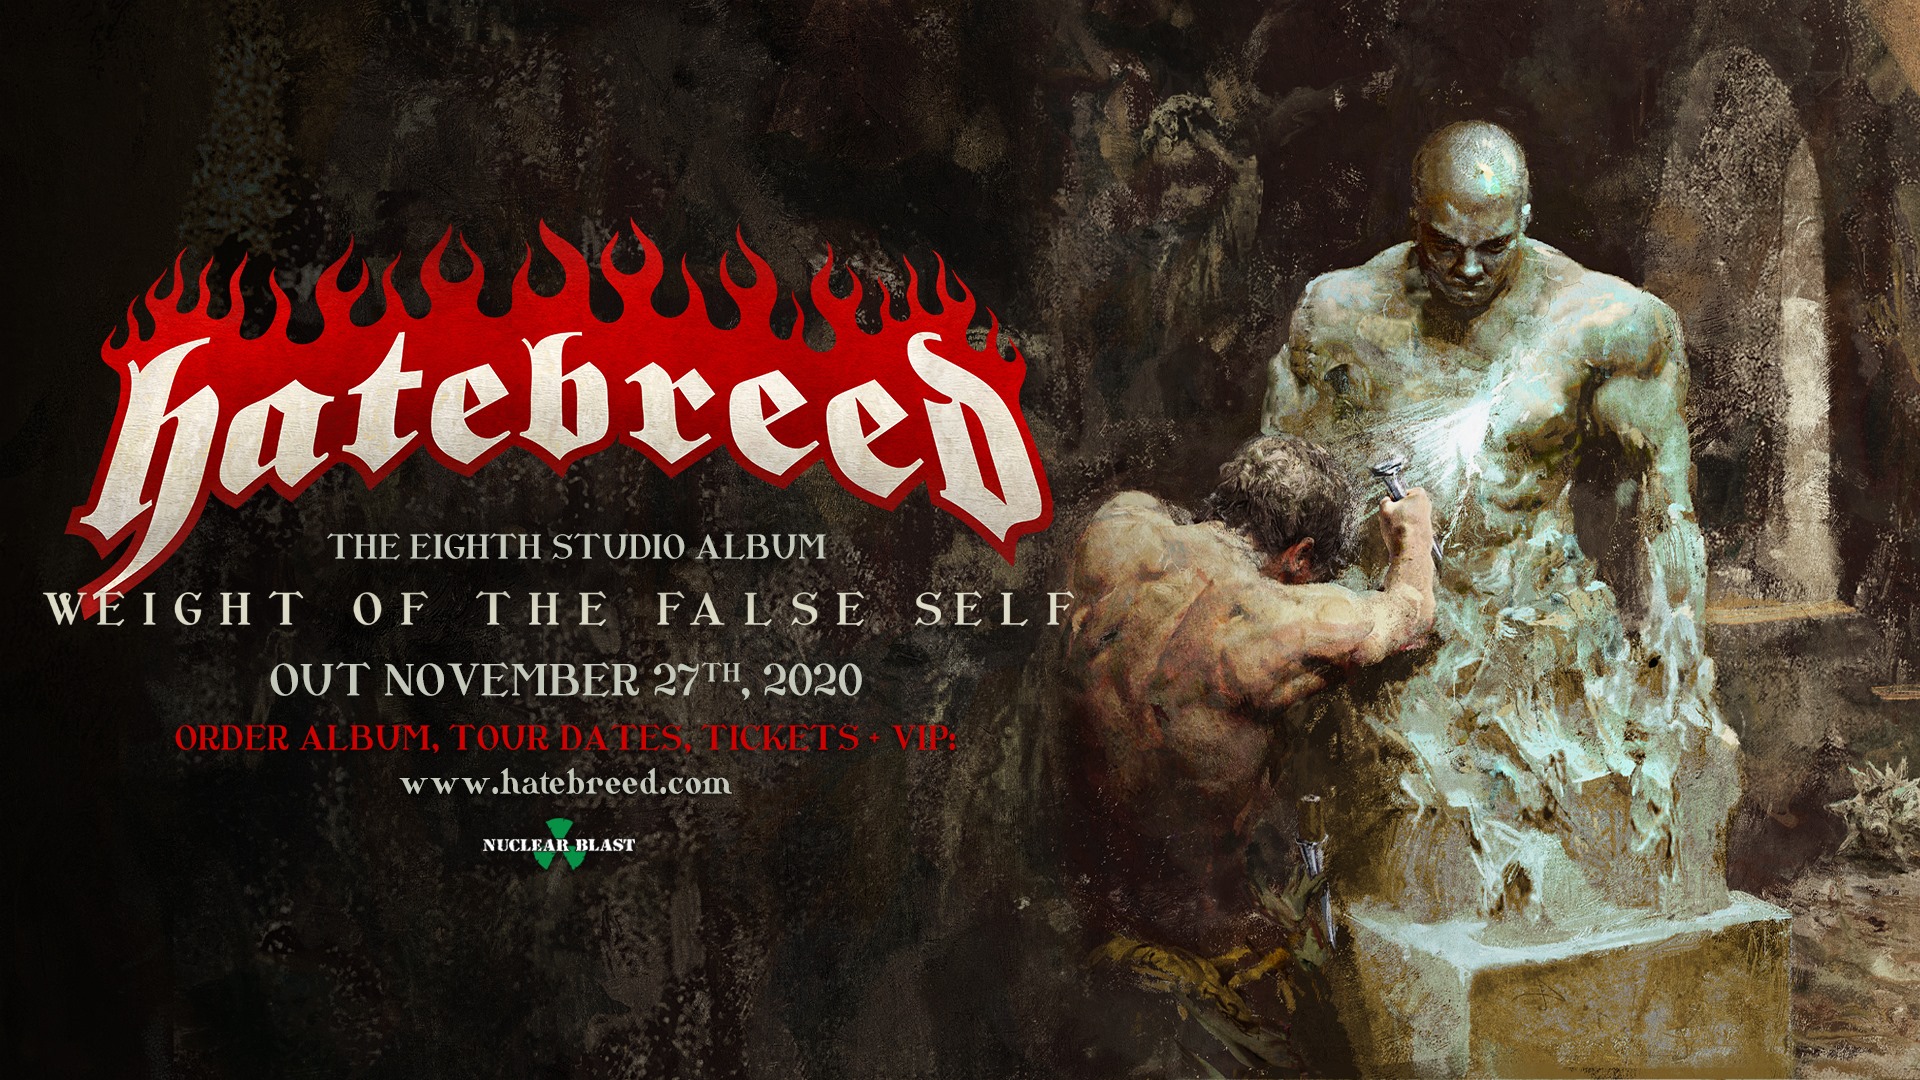 UPCOMING RELEASE: Hatebreed